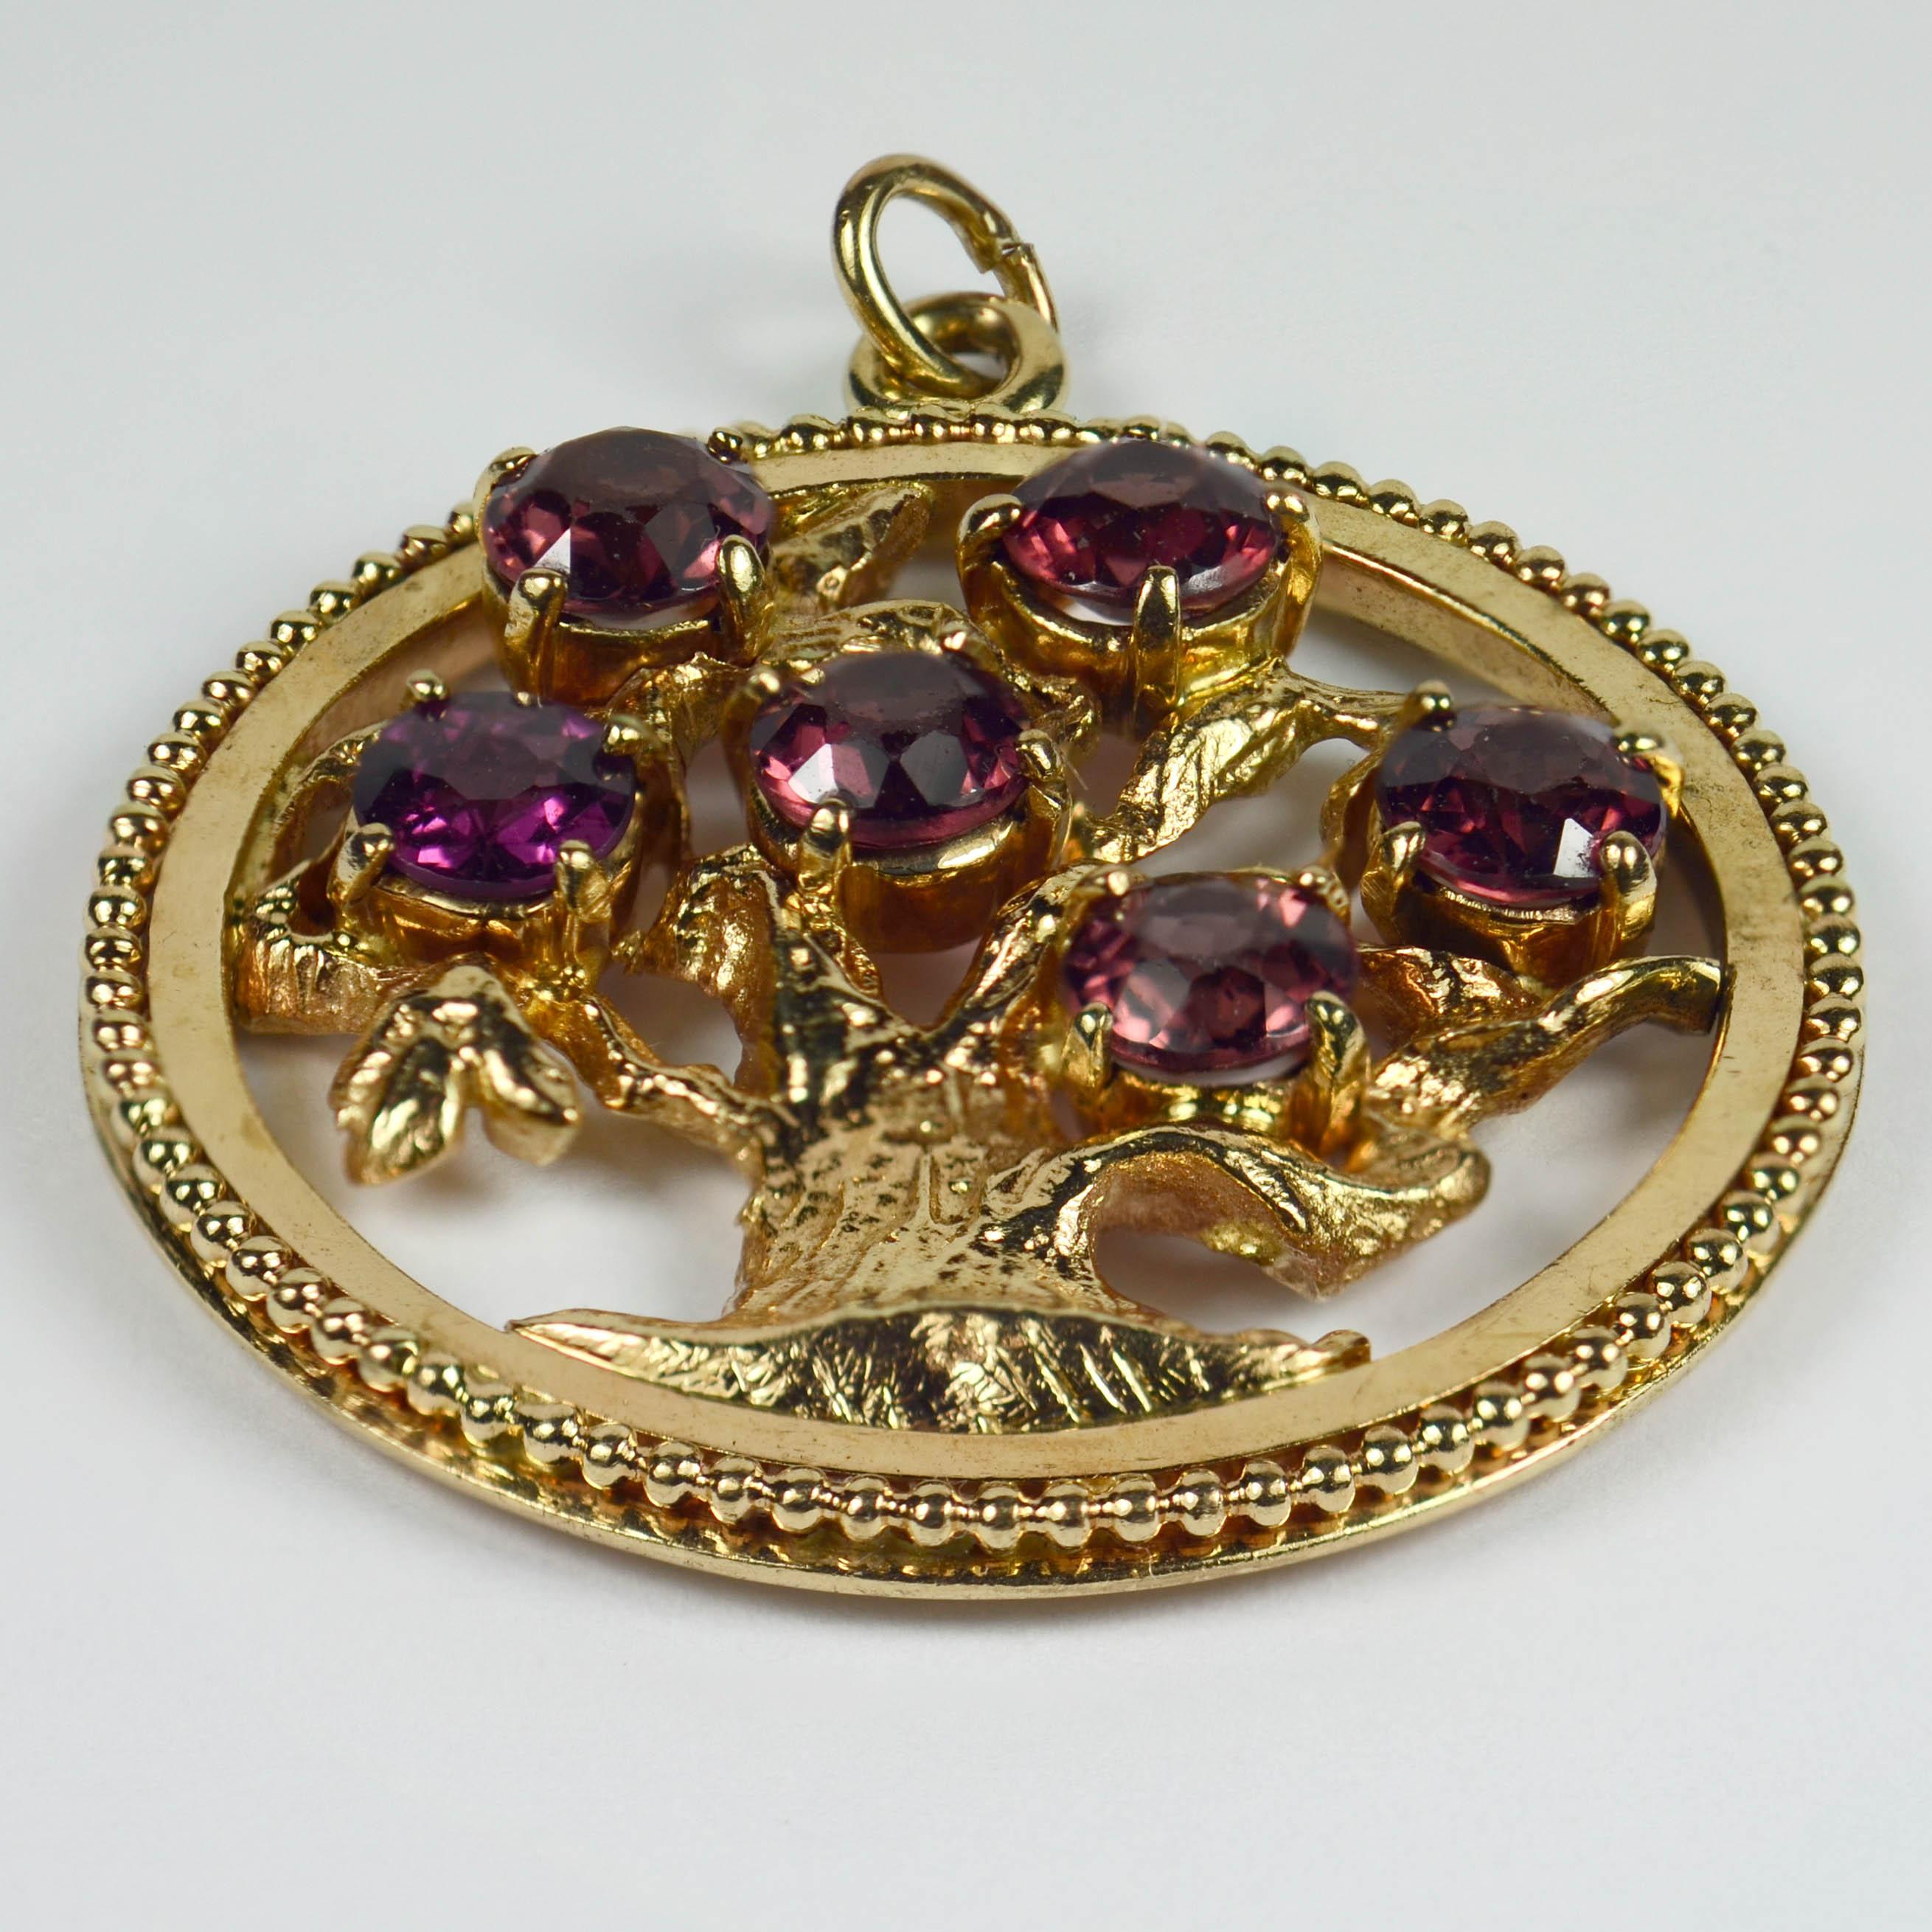 A large 14 karat yellow gold charm pendant designed as an open medallion with beaded edge, depicting a tree of life set with six red garnets, each weighing approximately 1 carat. Stamped 14K for 14 karat gold and American manufacture.

Total gem